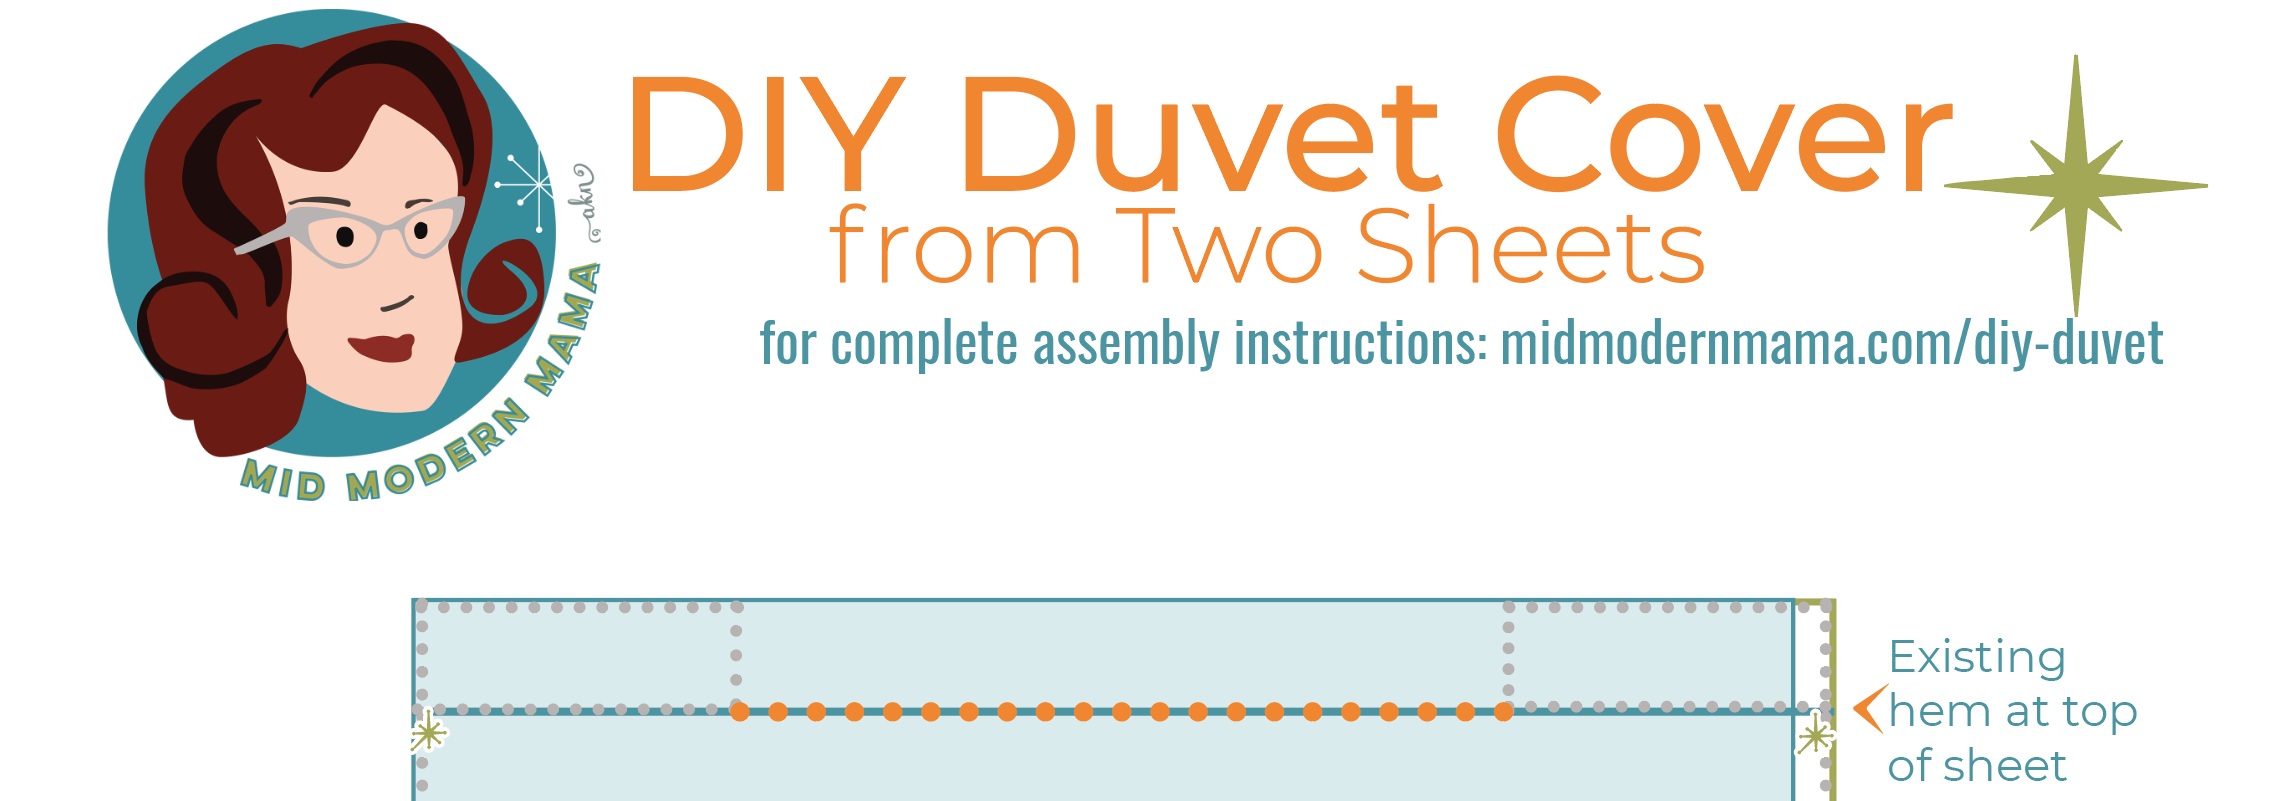 Make A Duvet Cover From Sheets Mid, How To Make A Duvet Cover From Flat Sheets